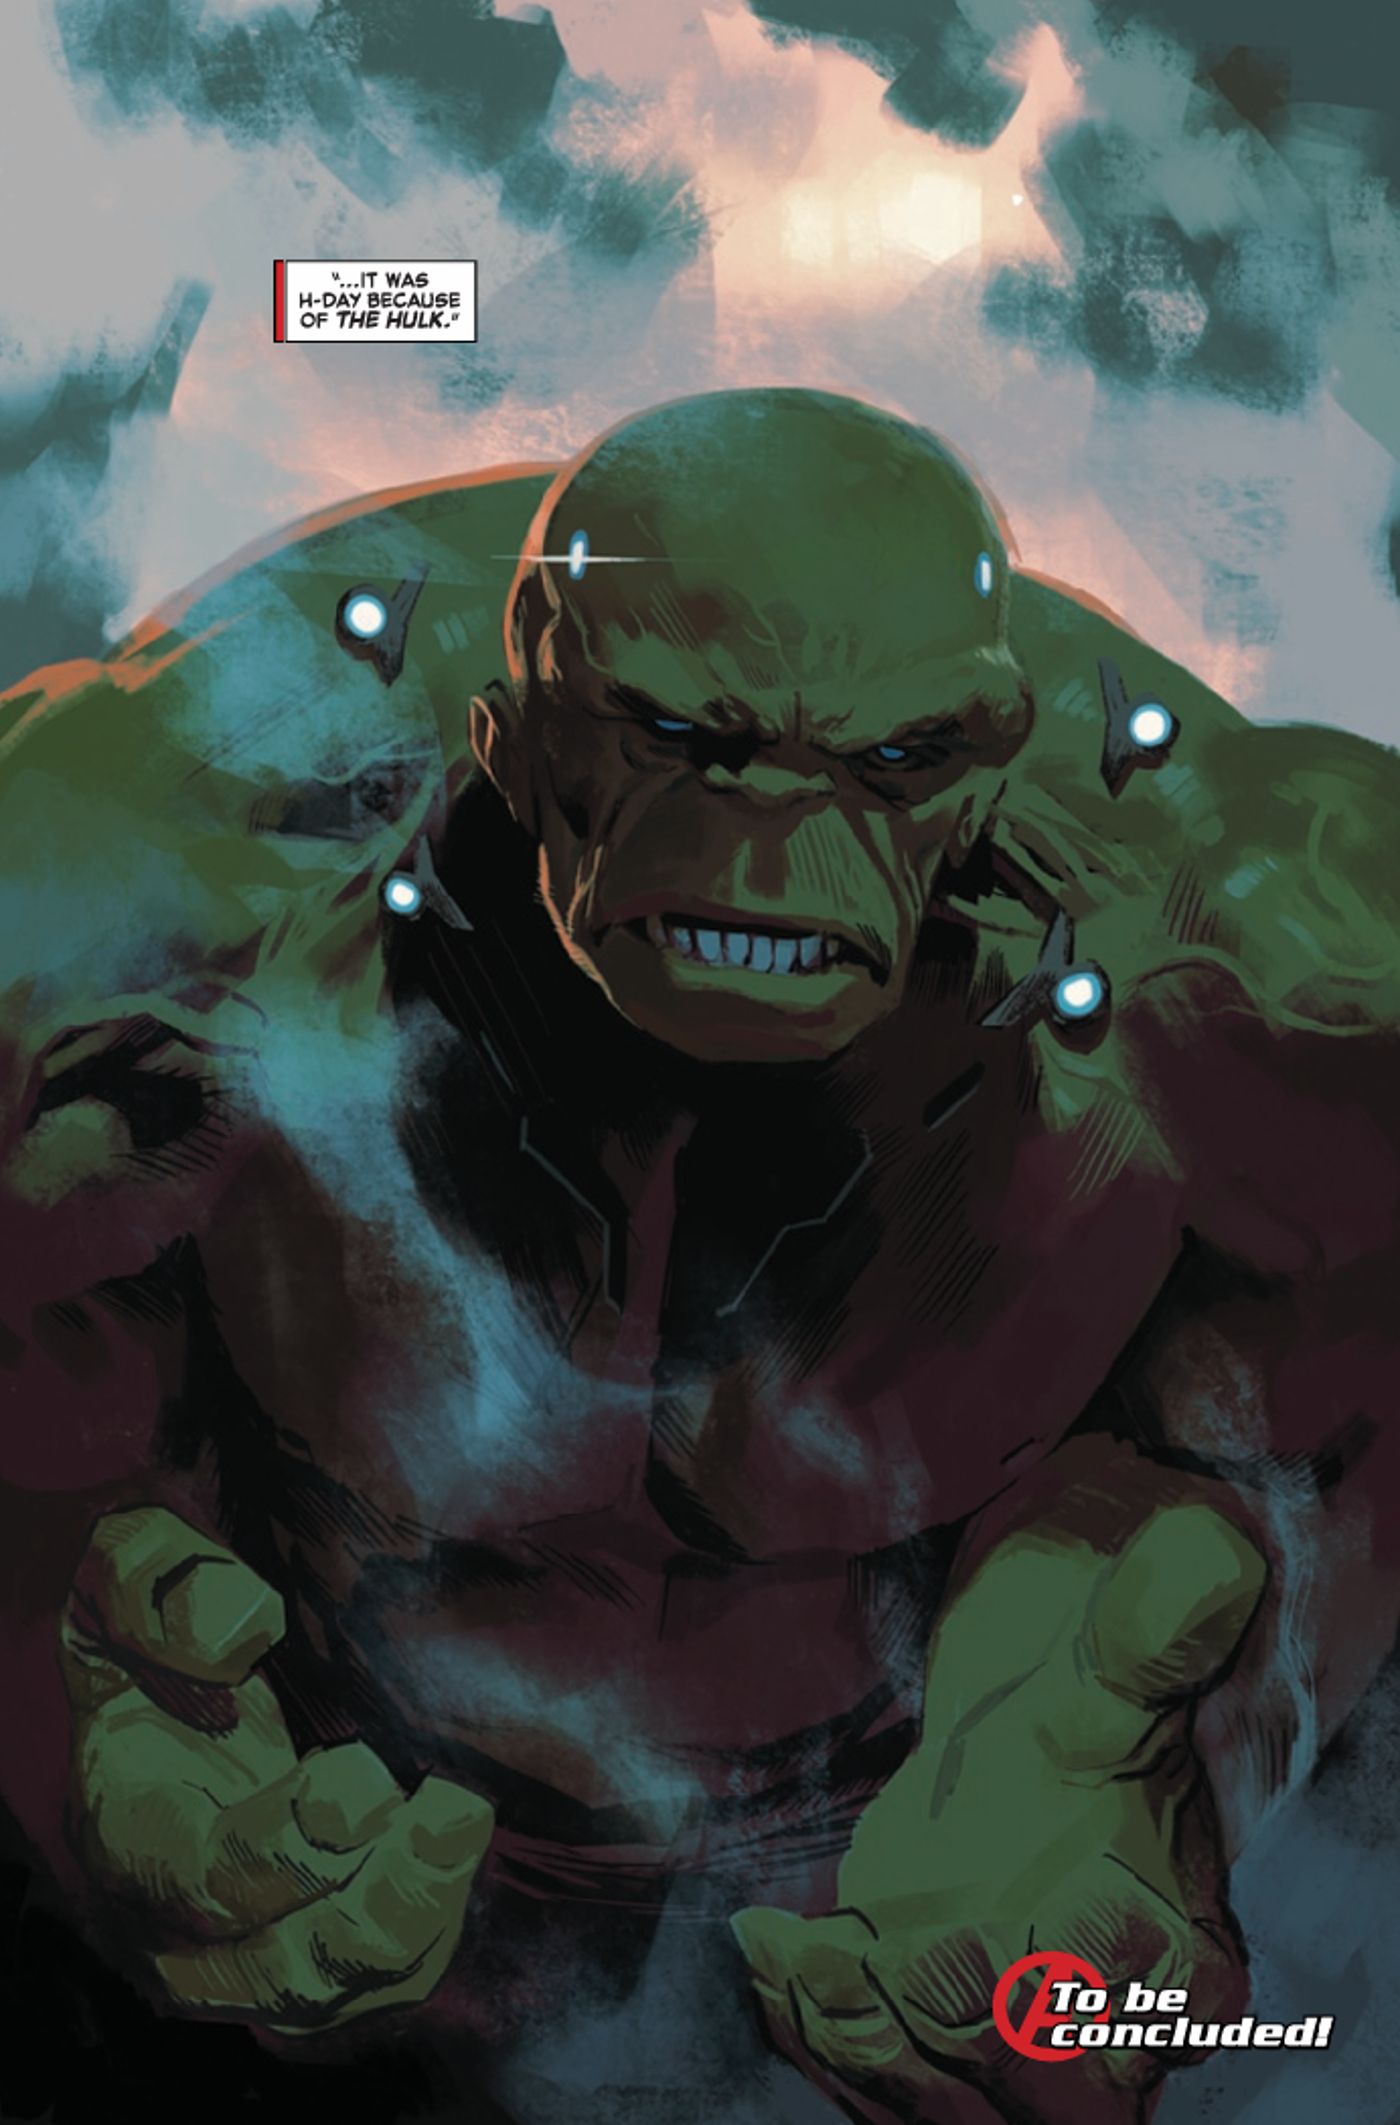 A Major Avengers Hero Joins the Red Skull in Shocking Betrayal